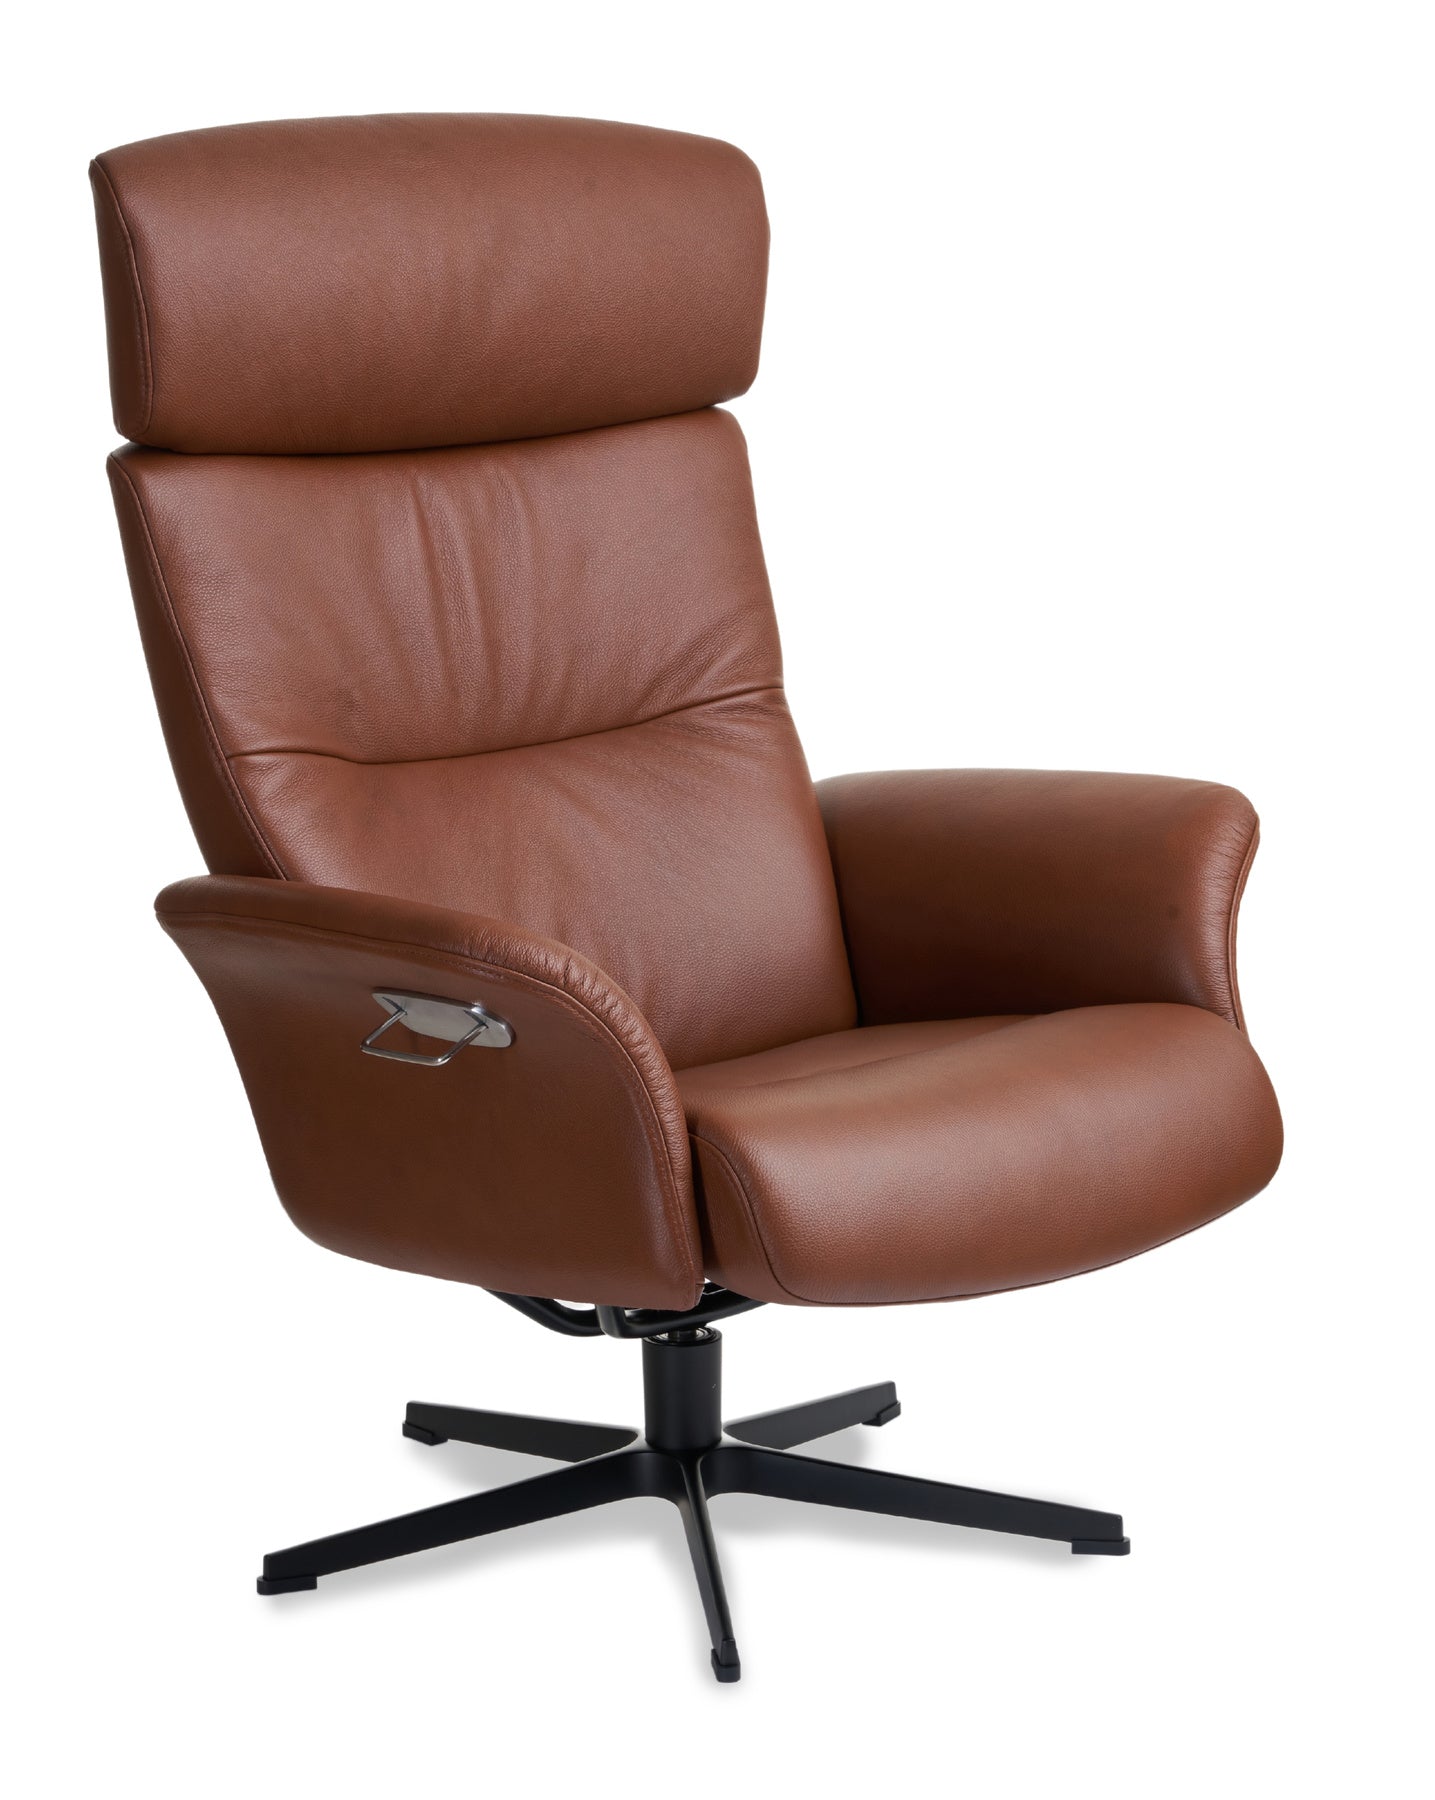 MASTER CLASSIC CHAIR by CONFORM